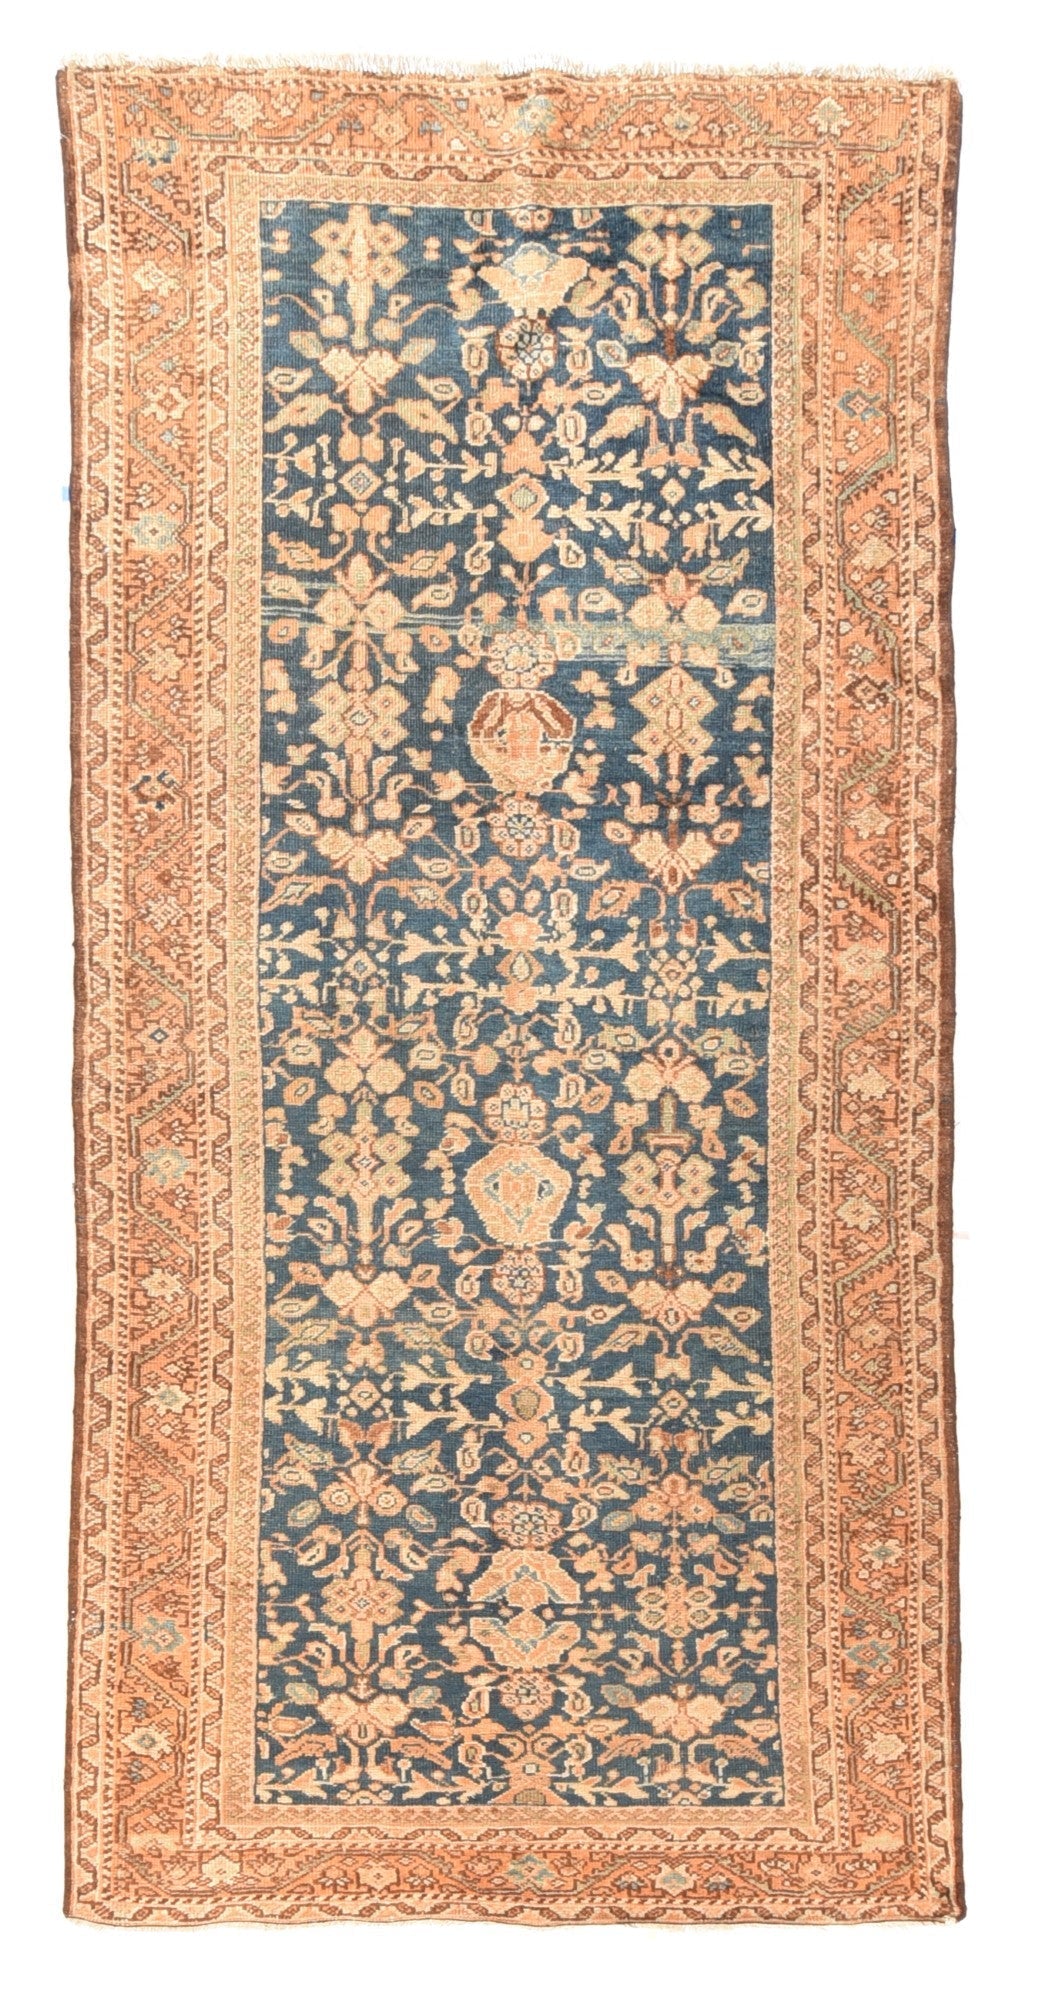 Antique Mahal Sultanabad Rug 4'2'' x 9'4''